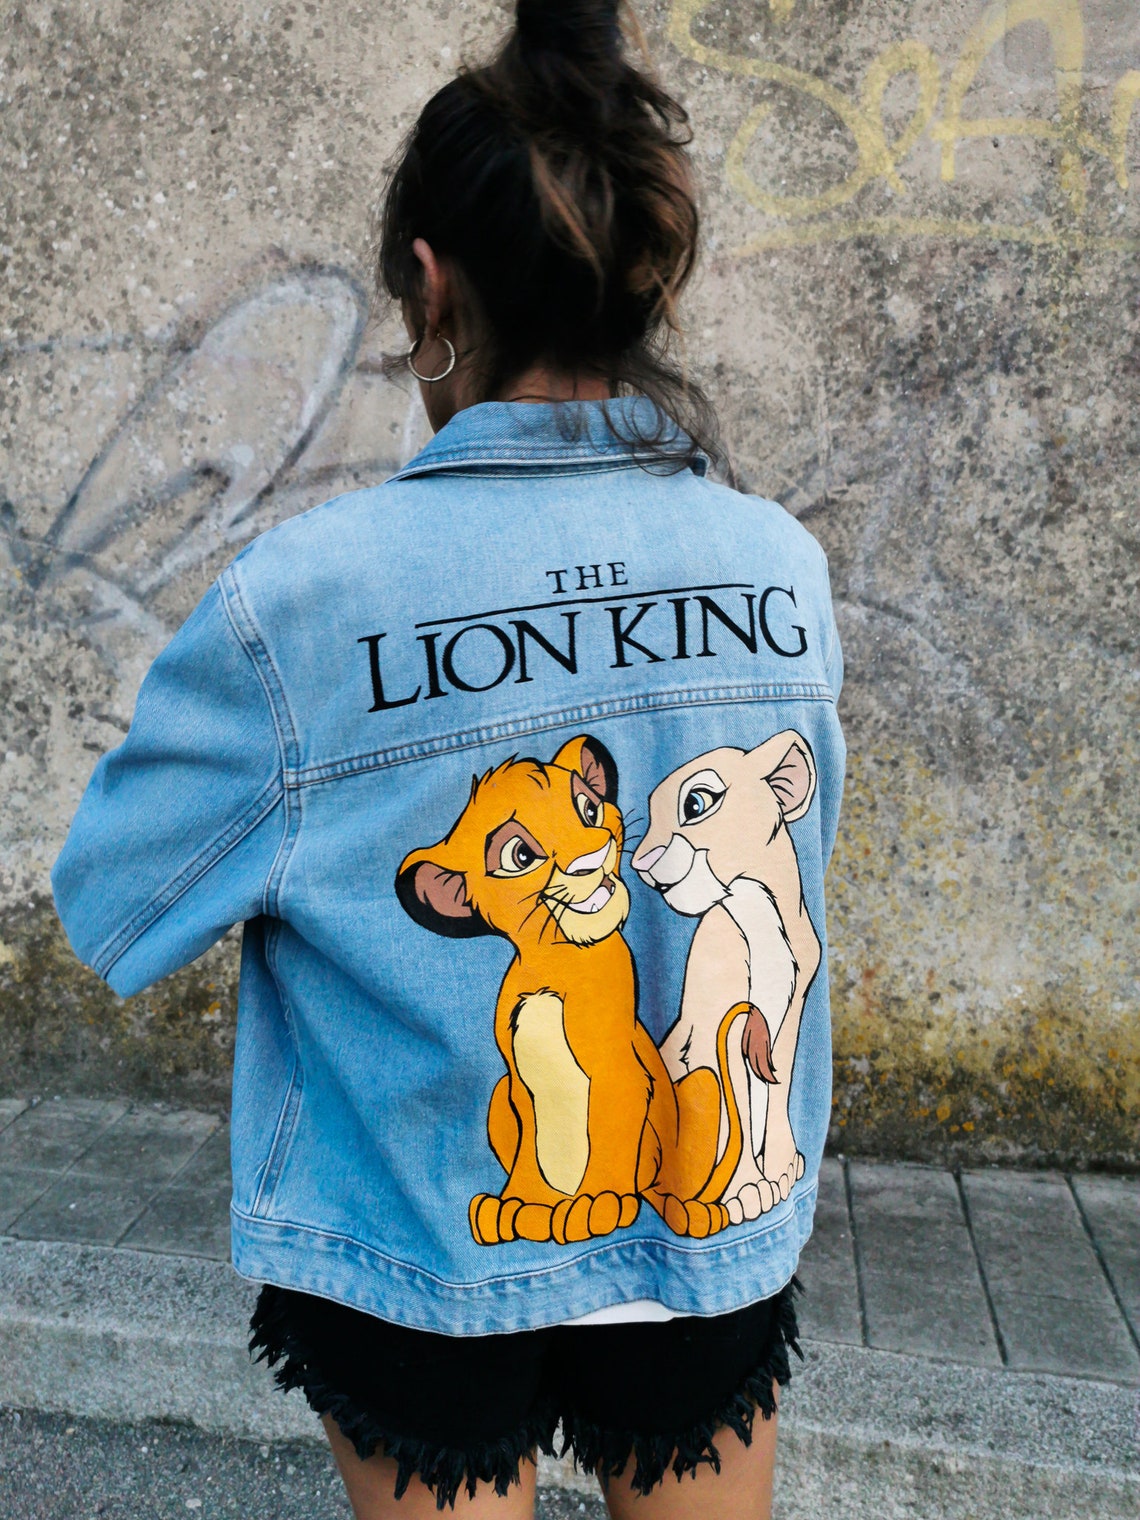 THE LION KING Hand Painted Denim Jacket - Etsy